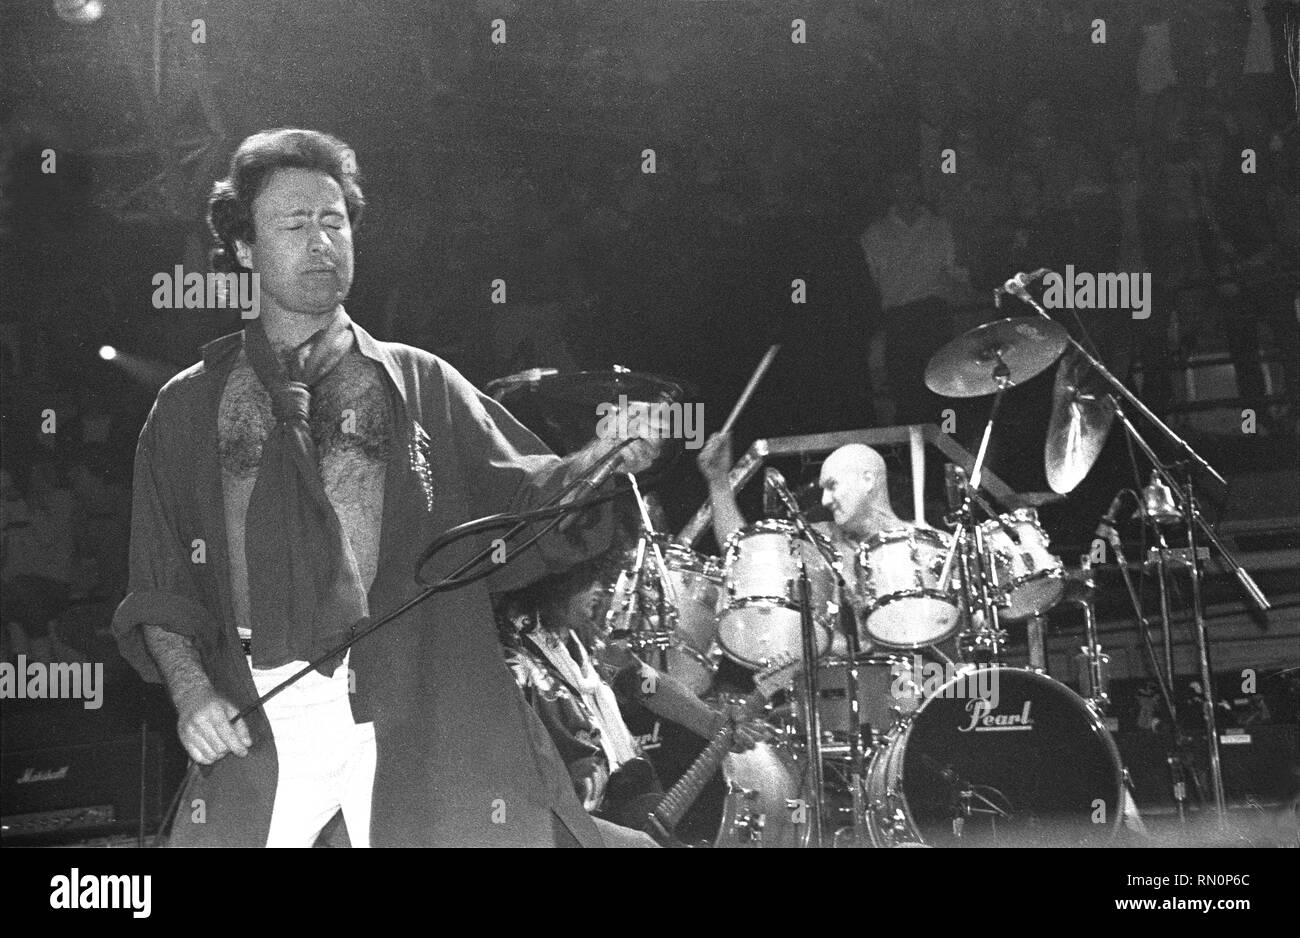 Singer Paul Rodgers is shown performing in stage during a 'live' concert appearance with The Firm. Stock Photo